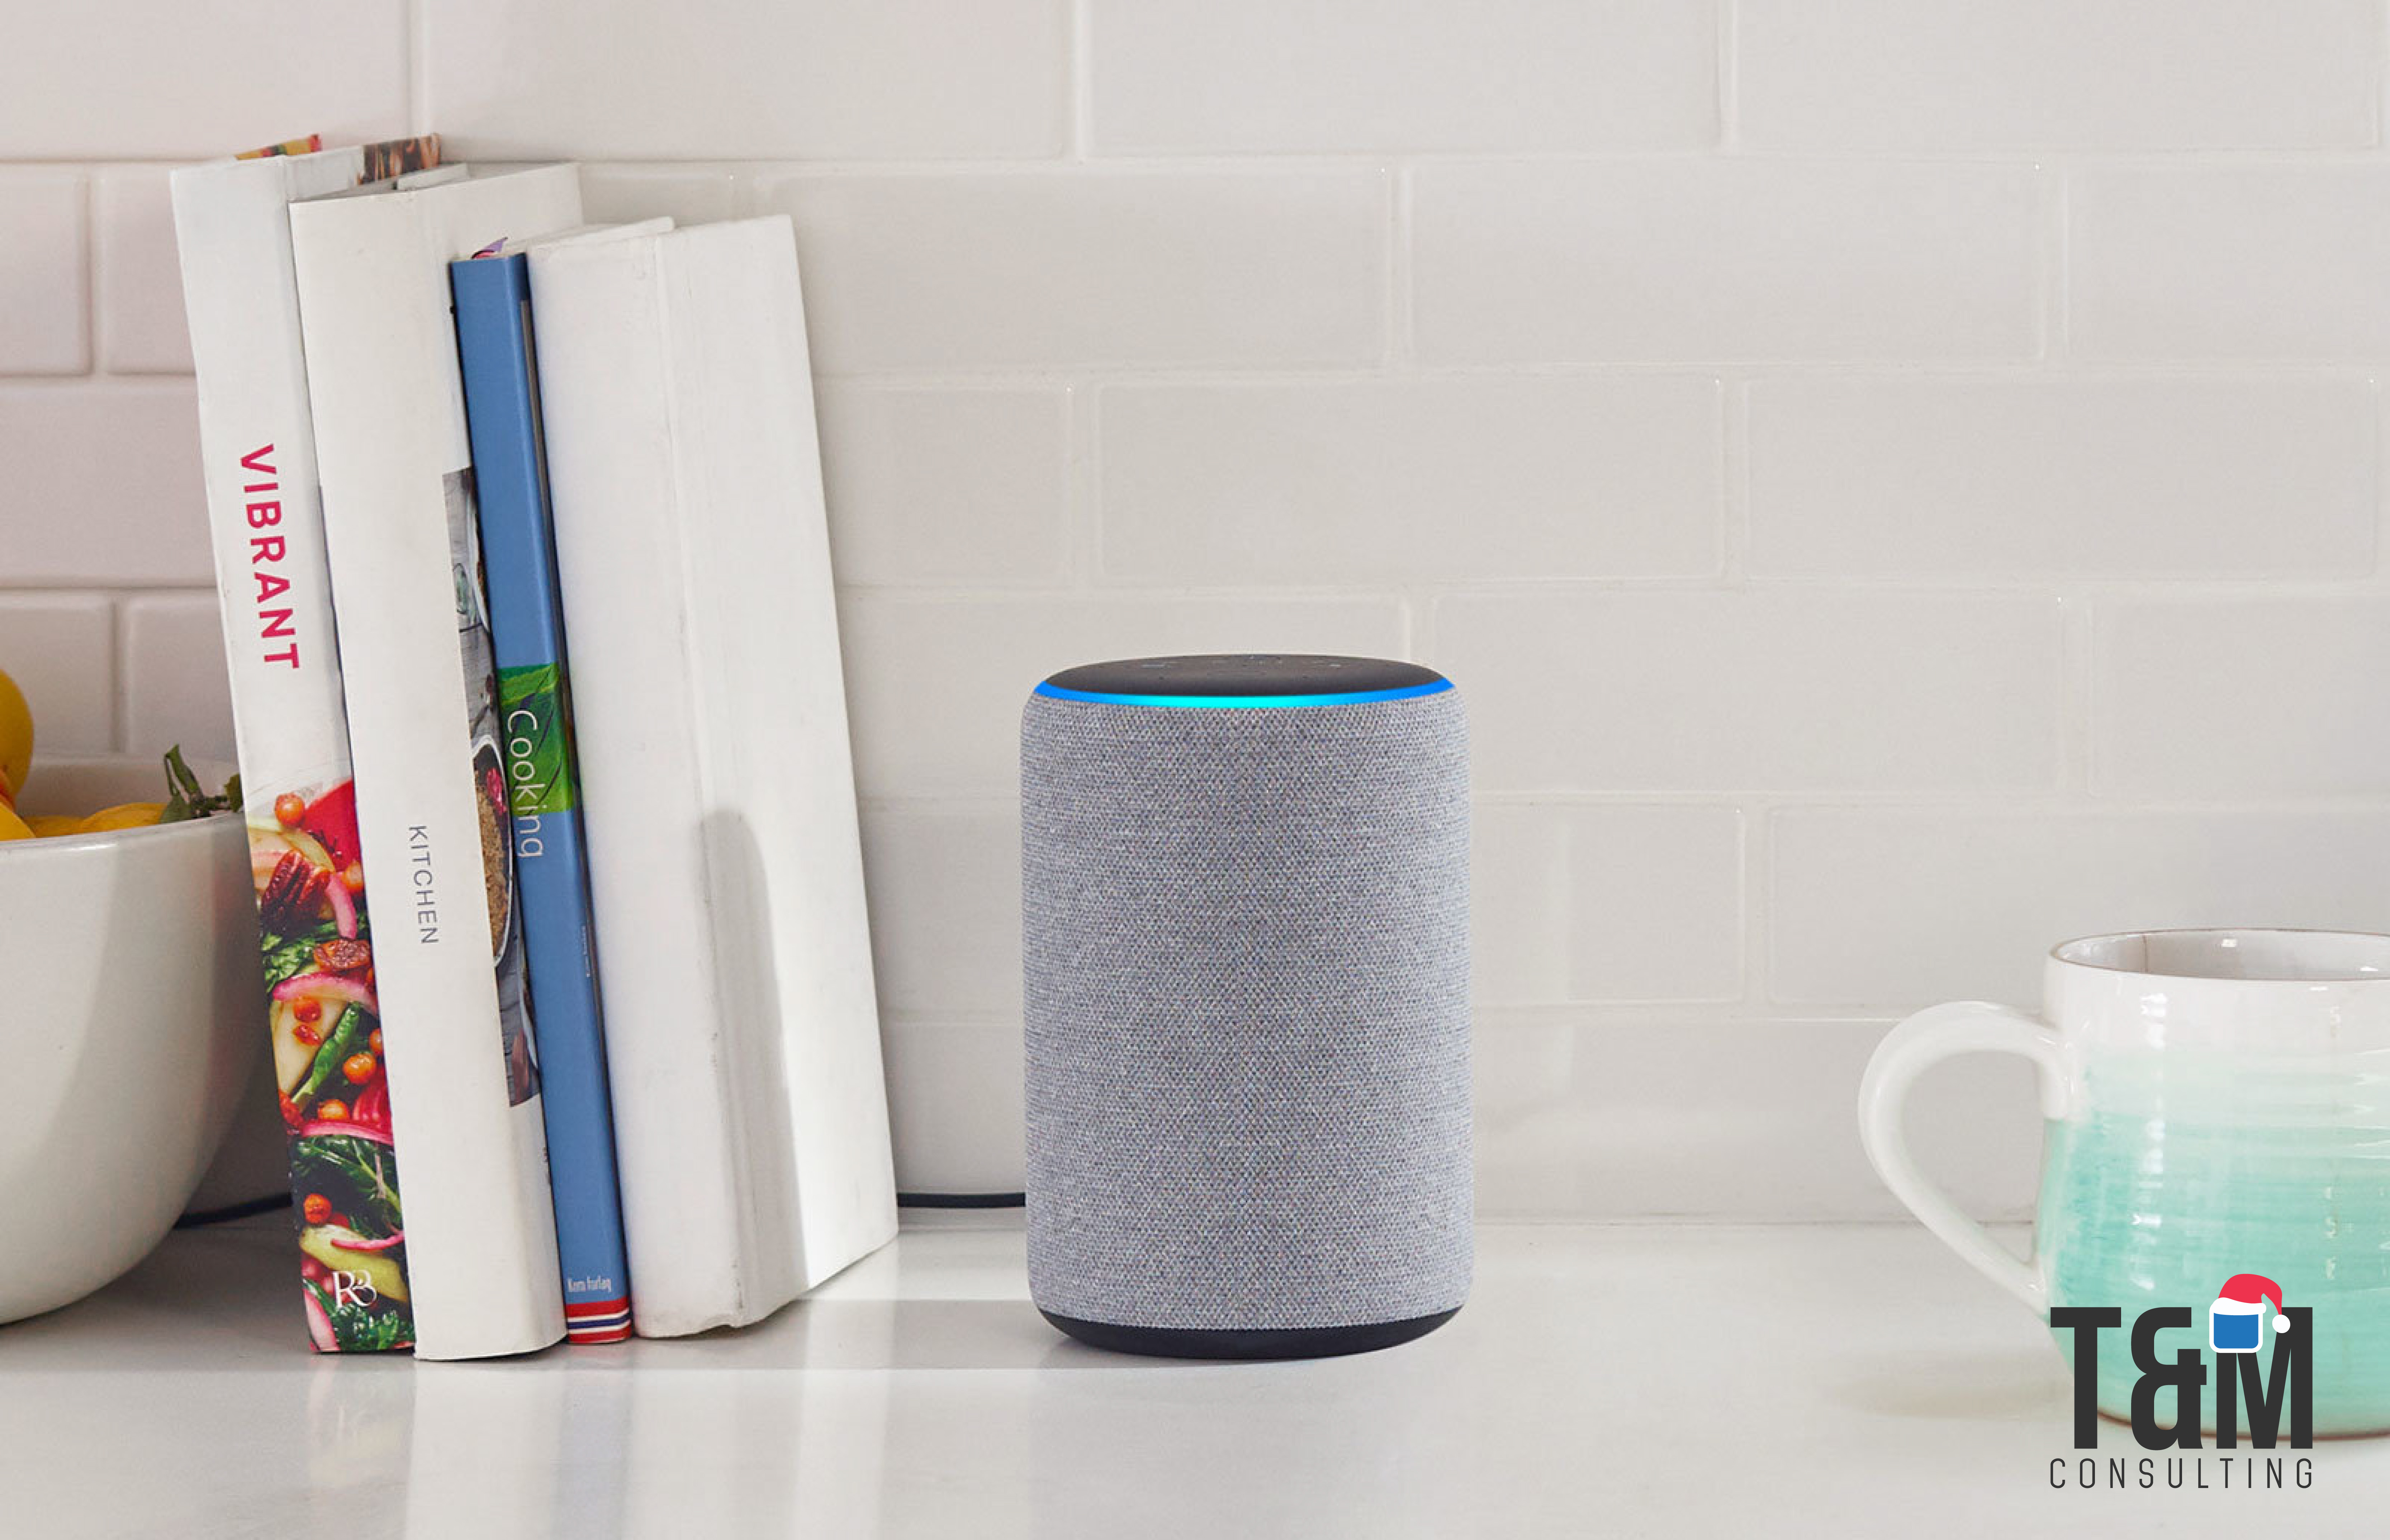 Discover the full potential of Alexa, Amazon's virtual assistant.